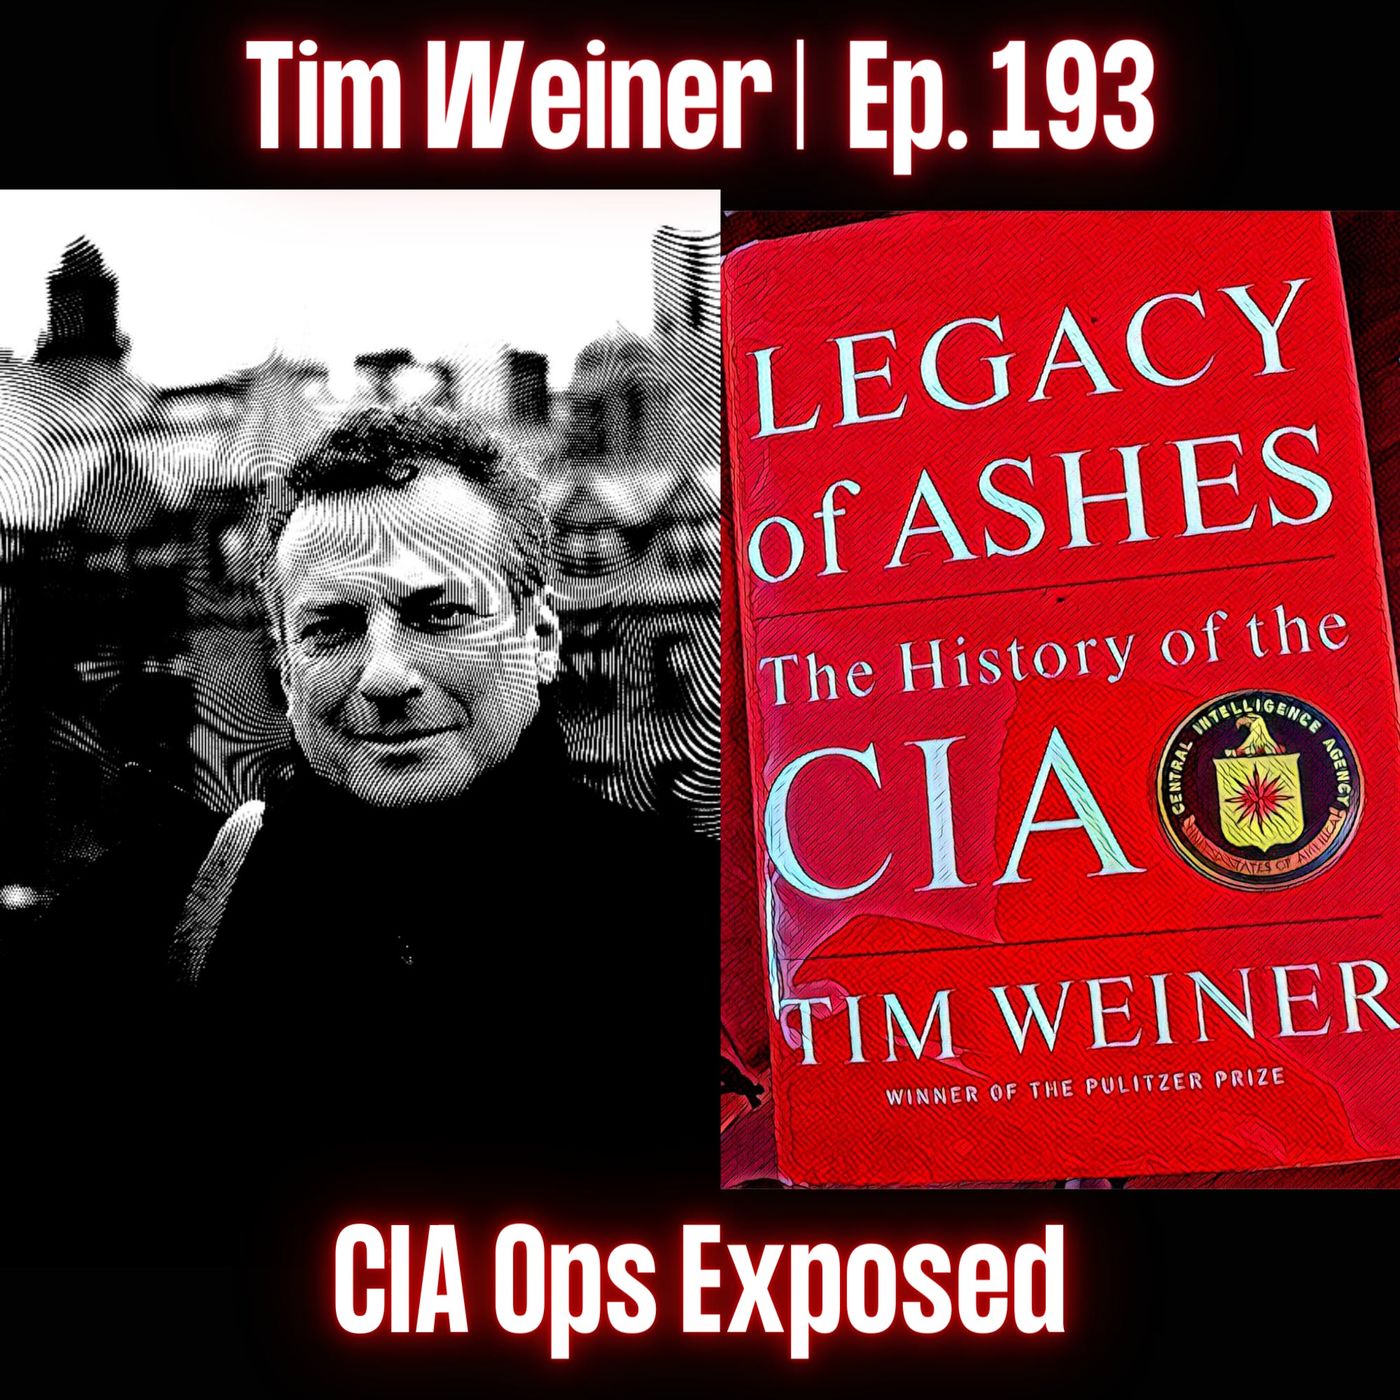 CIA Secrets & Subterfuge: An Unauthorized History | Tim Weiner | Ep. 193